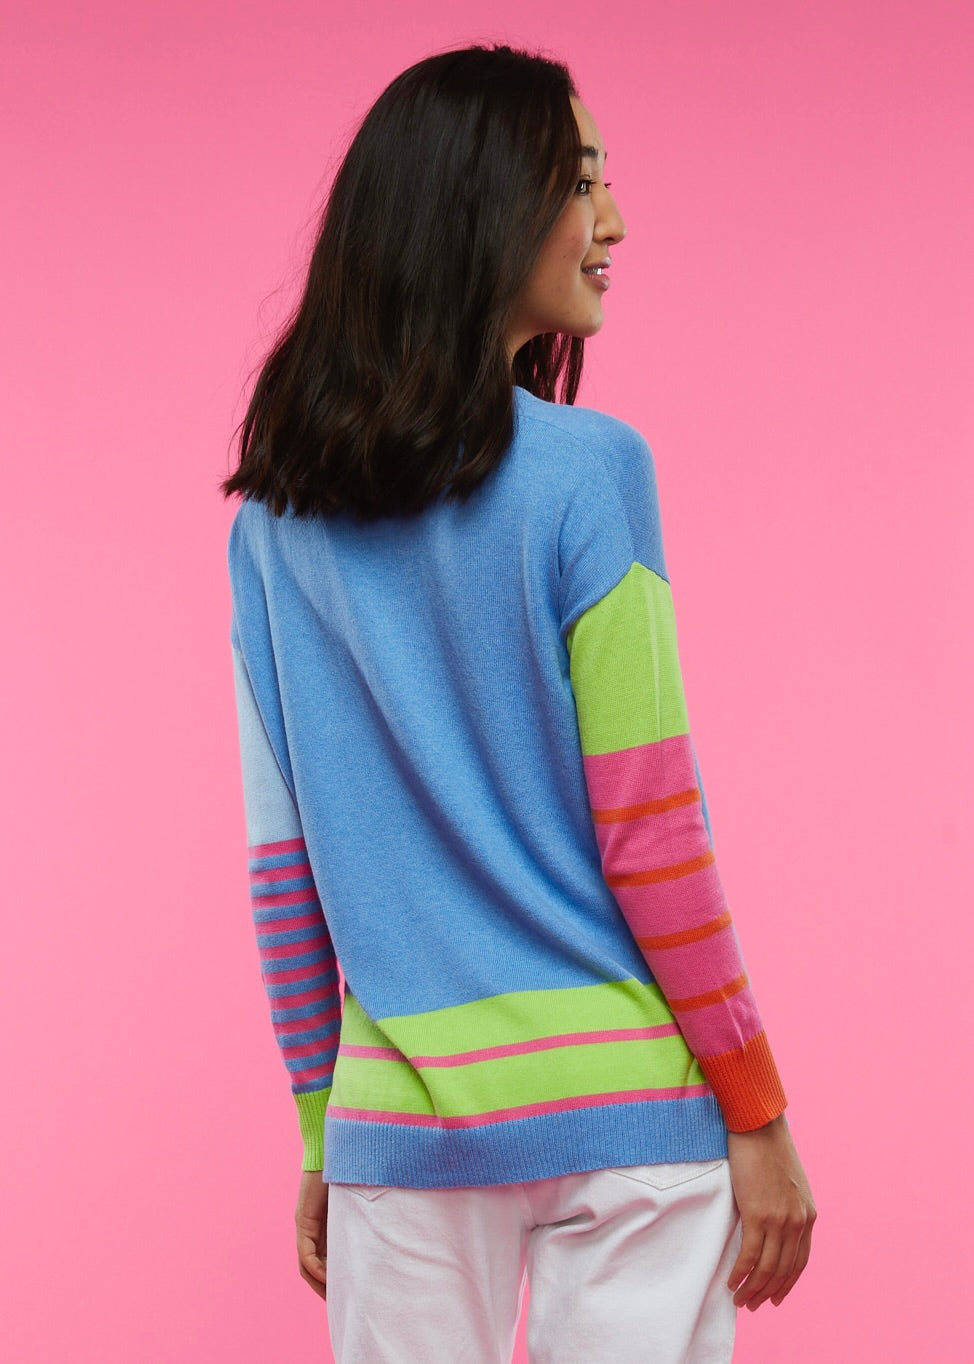 Zaket & Plover Zaket & Plover - Intarsia Squares Sweater - Chambray available at The Good Life Boutique